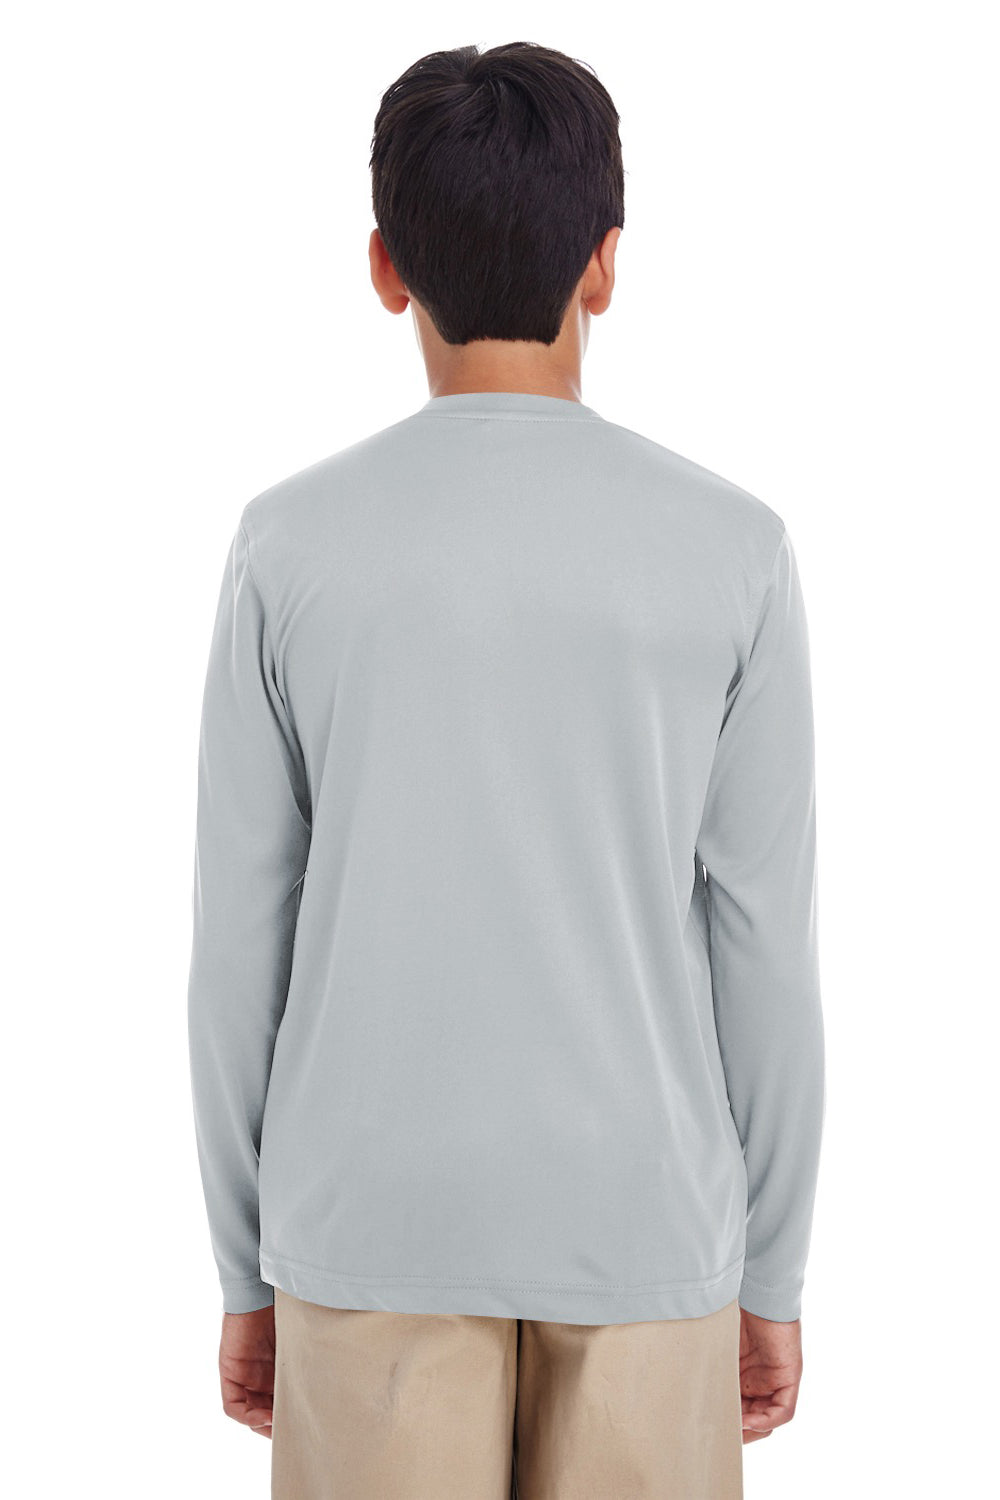 UltraClub 8622Y Youth Cool & Dry Performance Moisture Wicking Long Sleeve Crewneck T-Shirt Grey Back